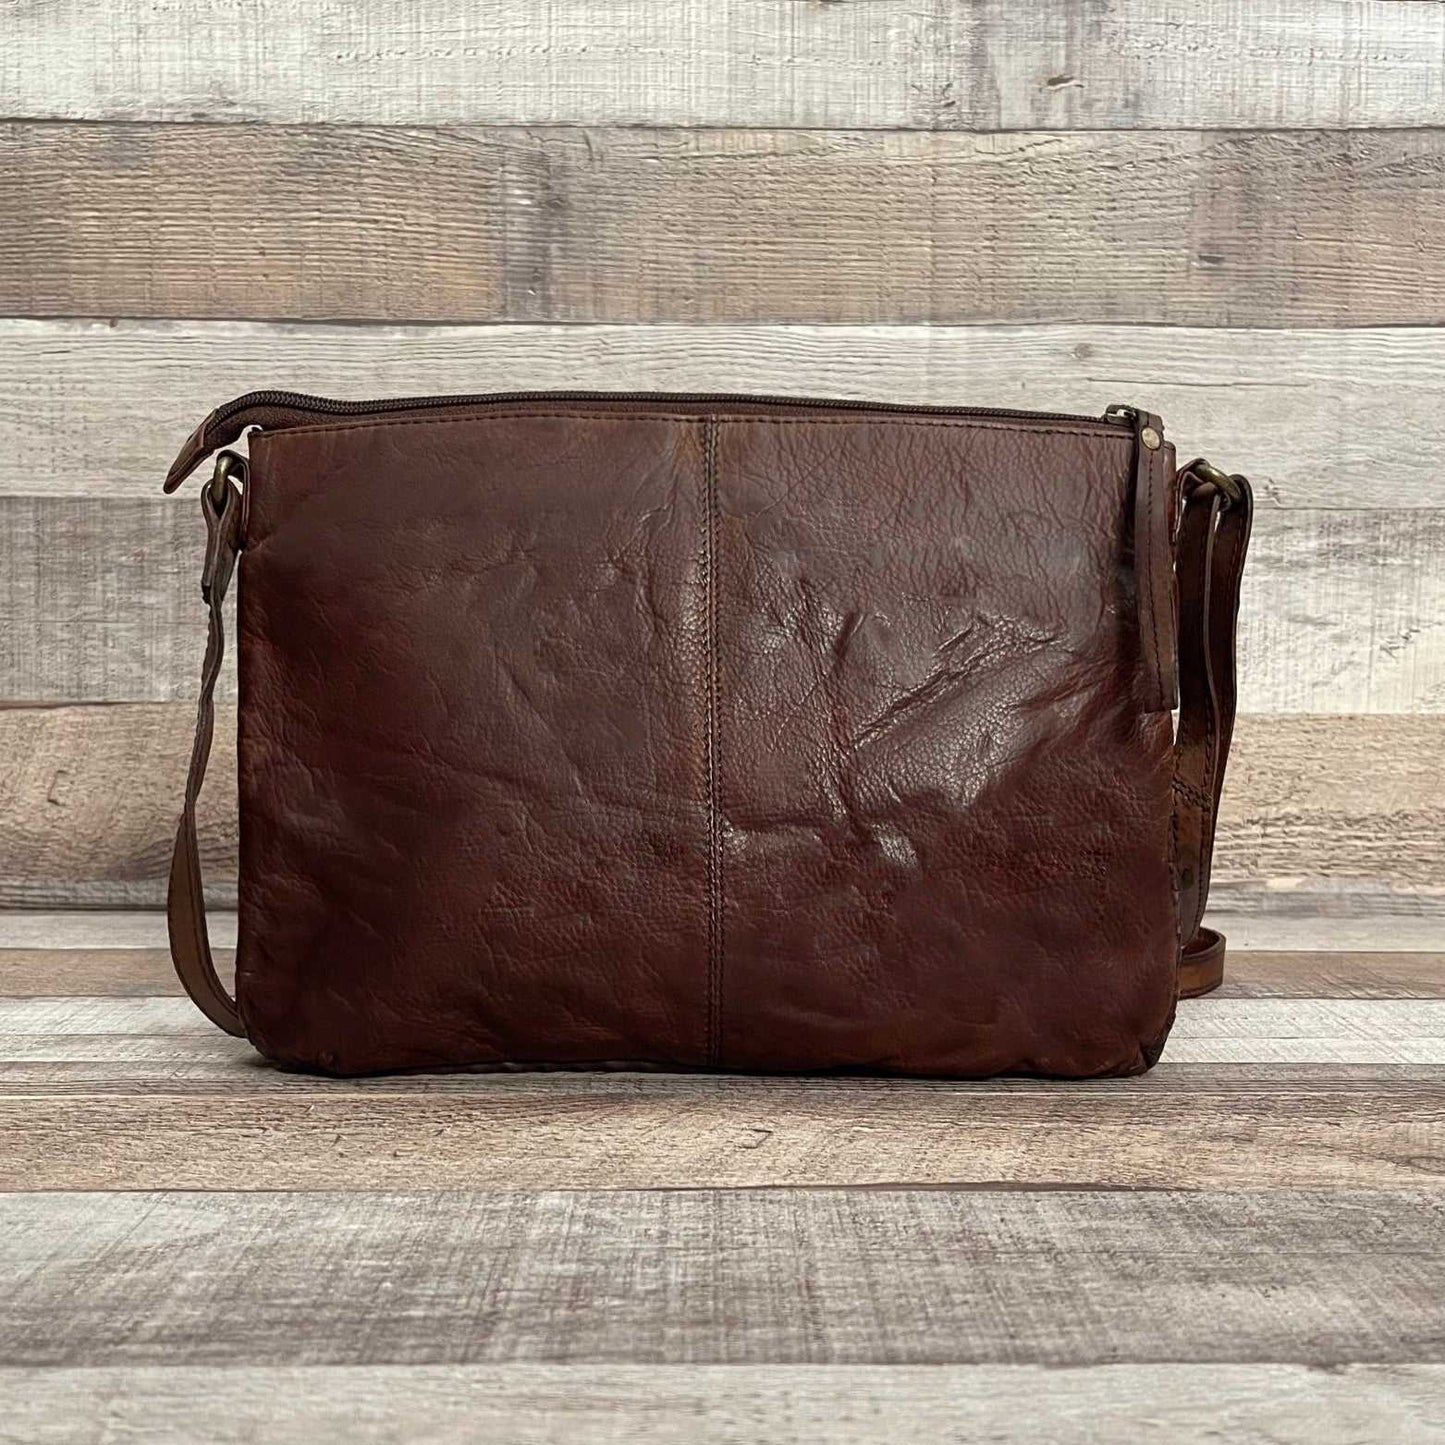 “VINTAGE SOUL III” Genuine Soft Leather Crossbody Bag With Vintage Accents